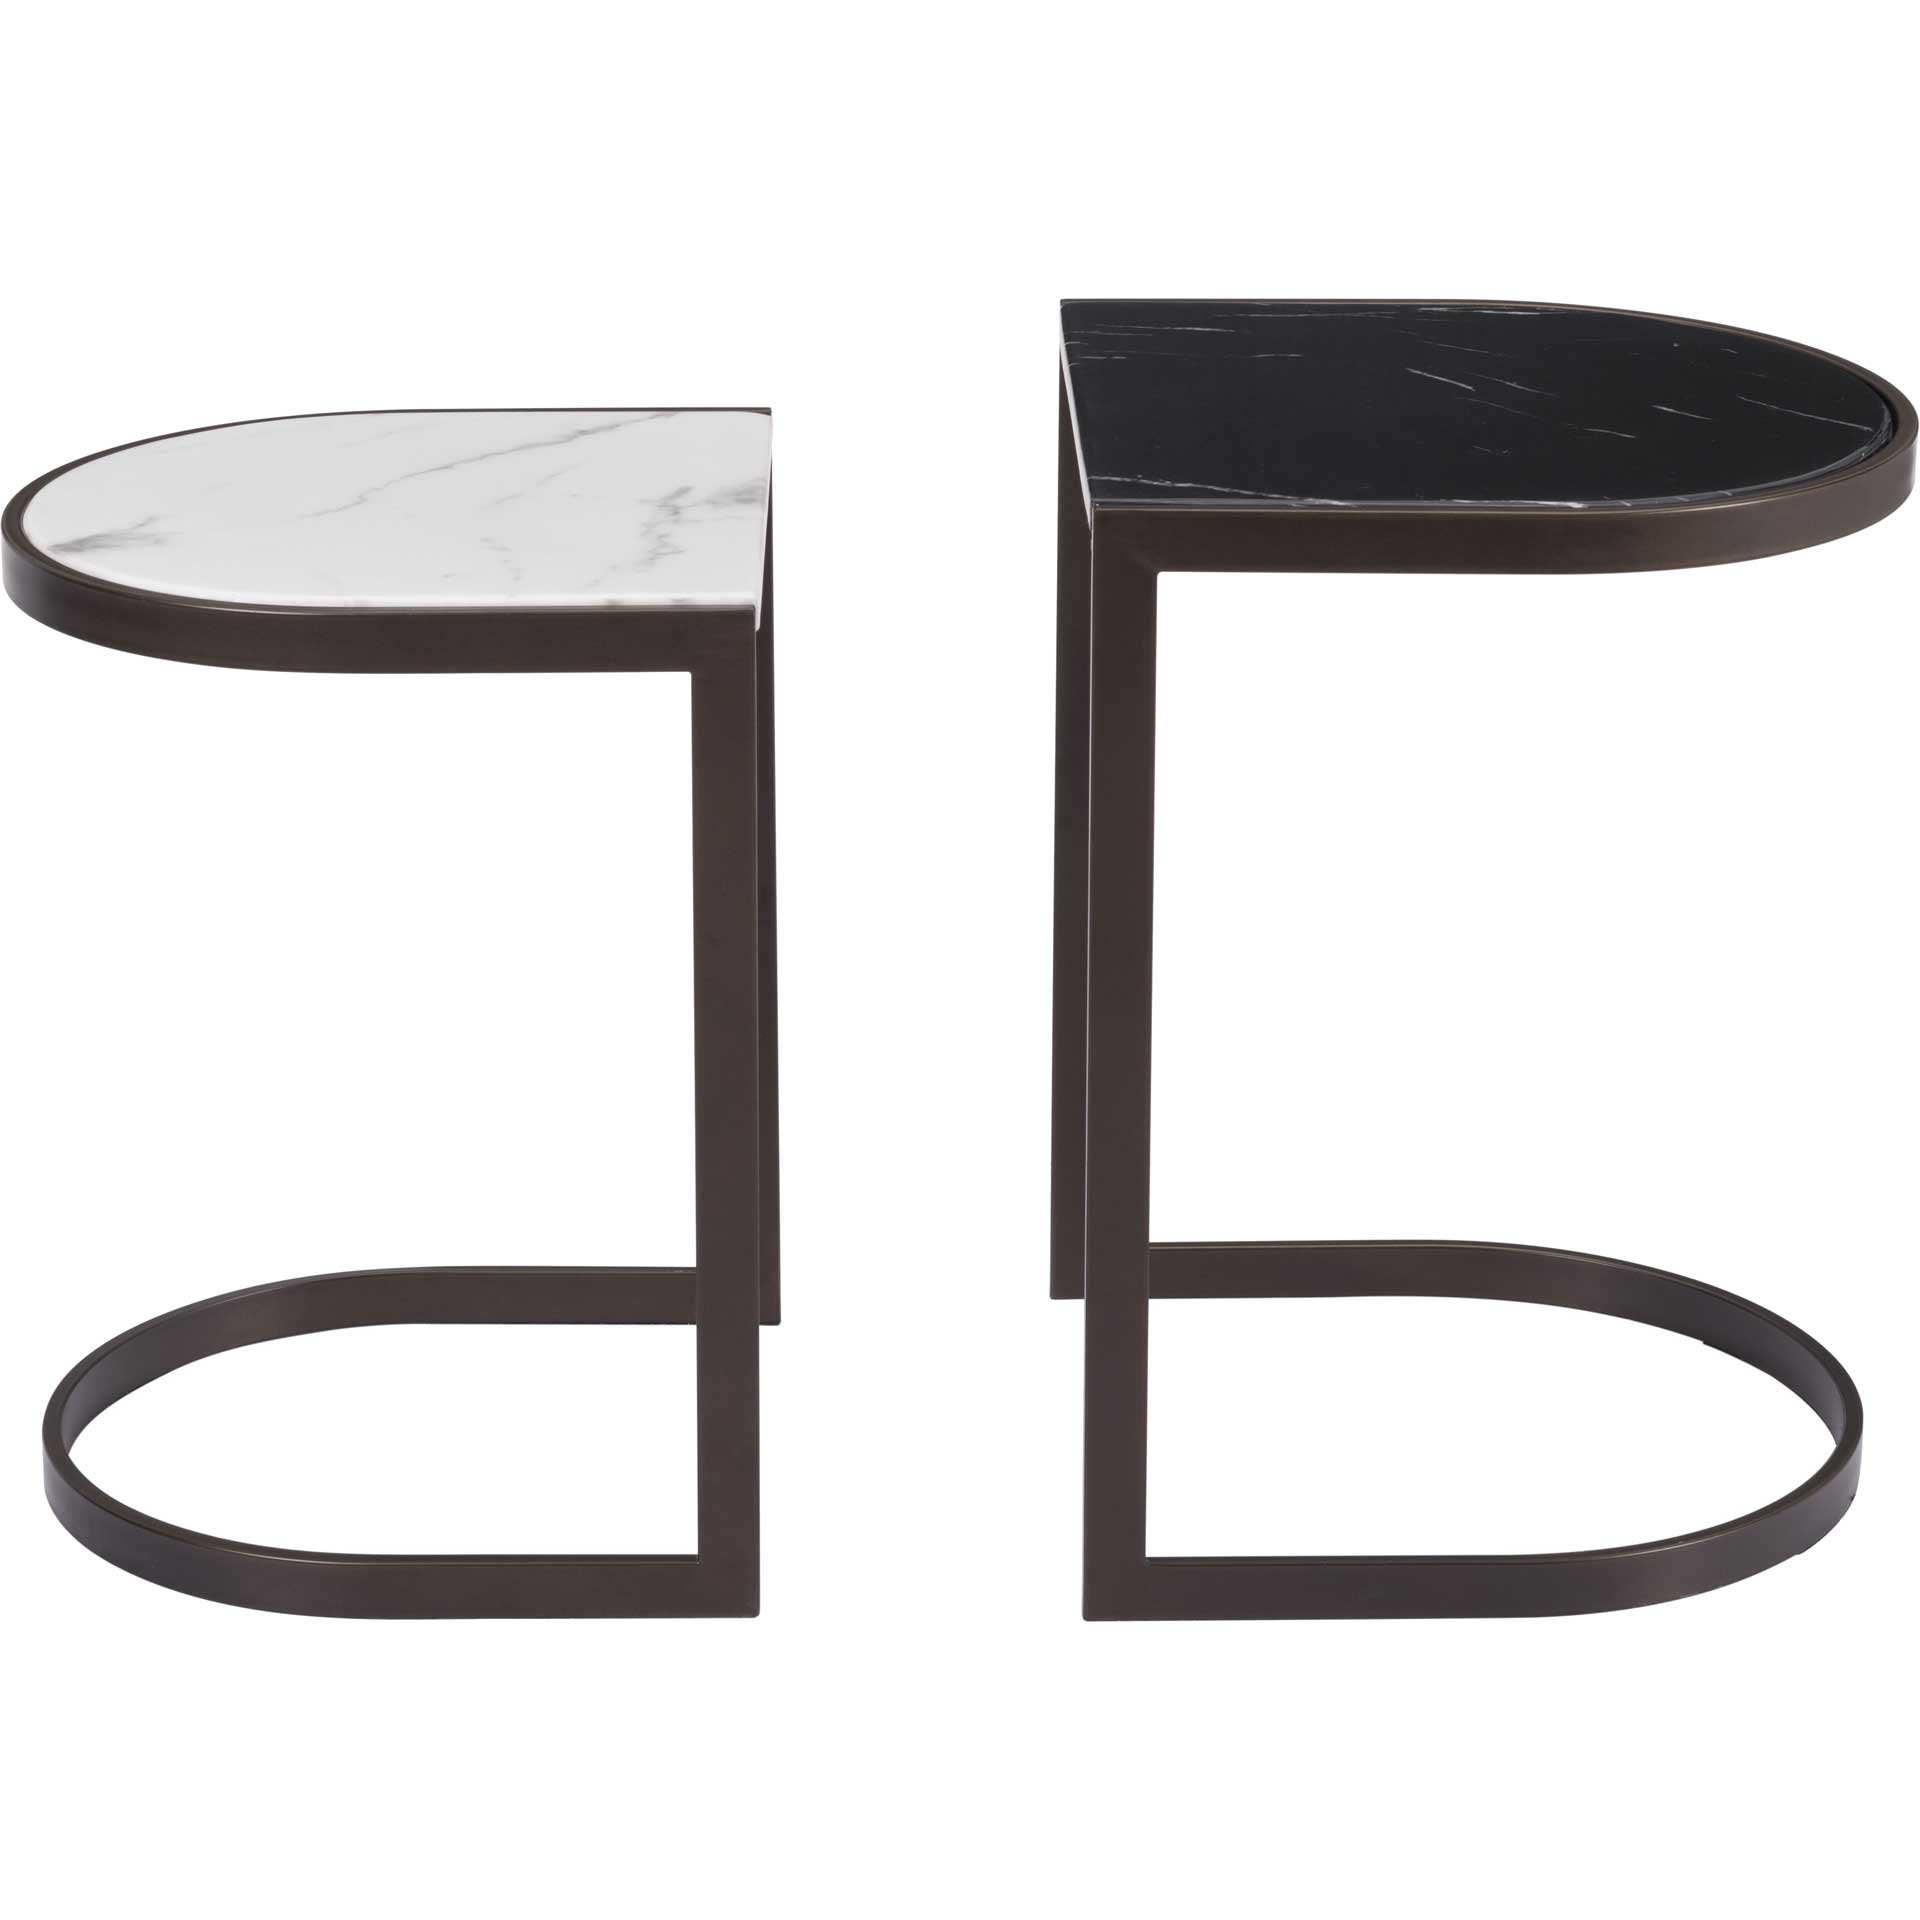 Shaw Nesting End Tables Black/Stone/Antique Brass